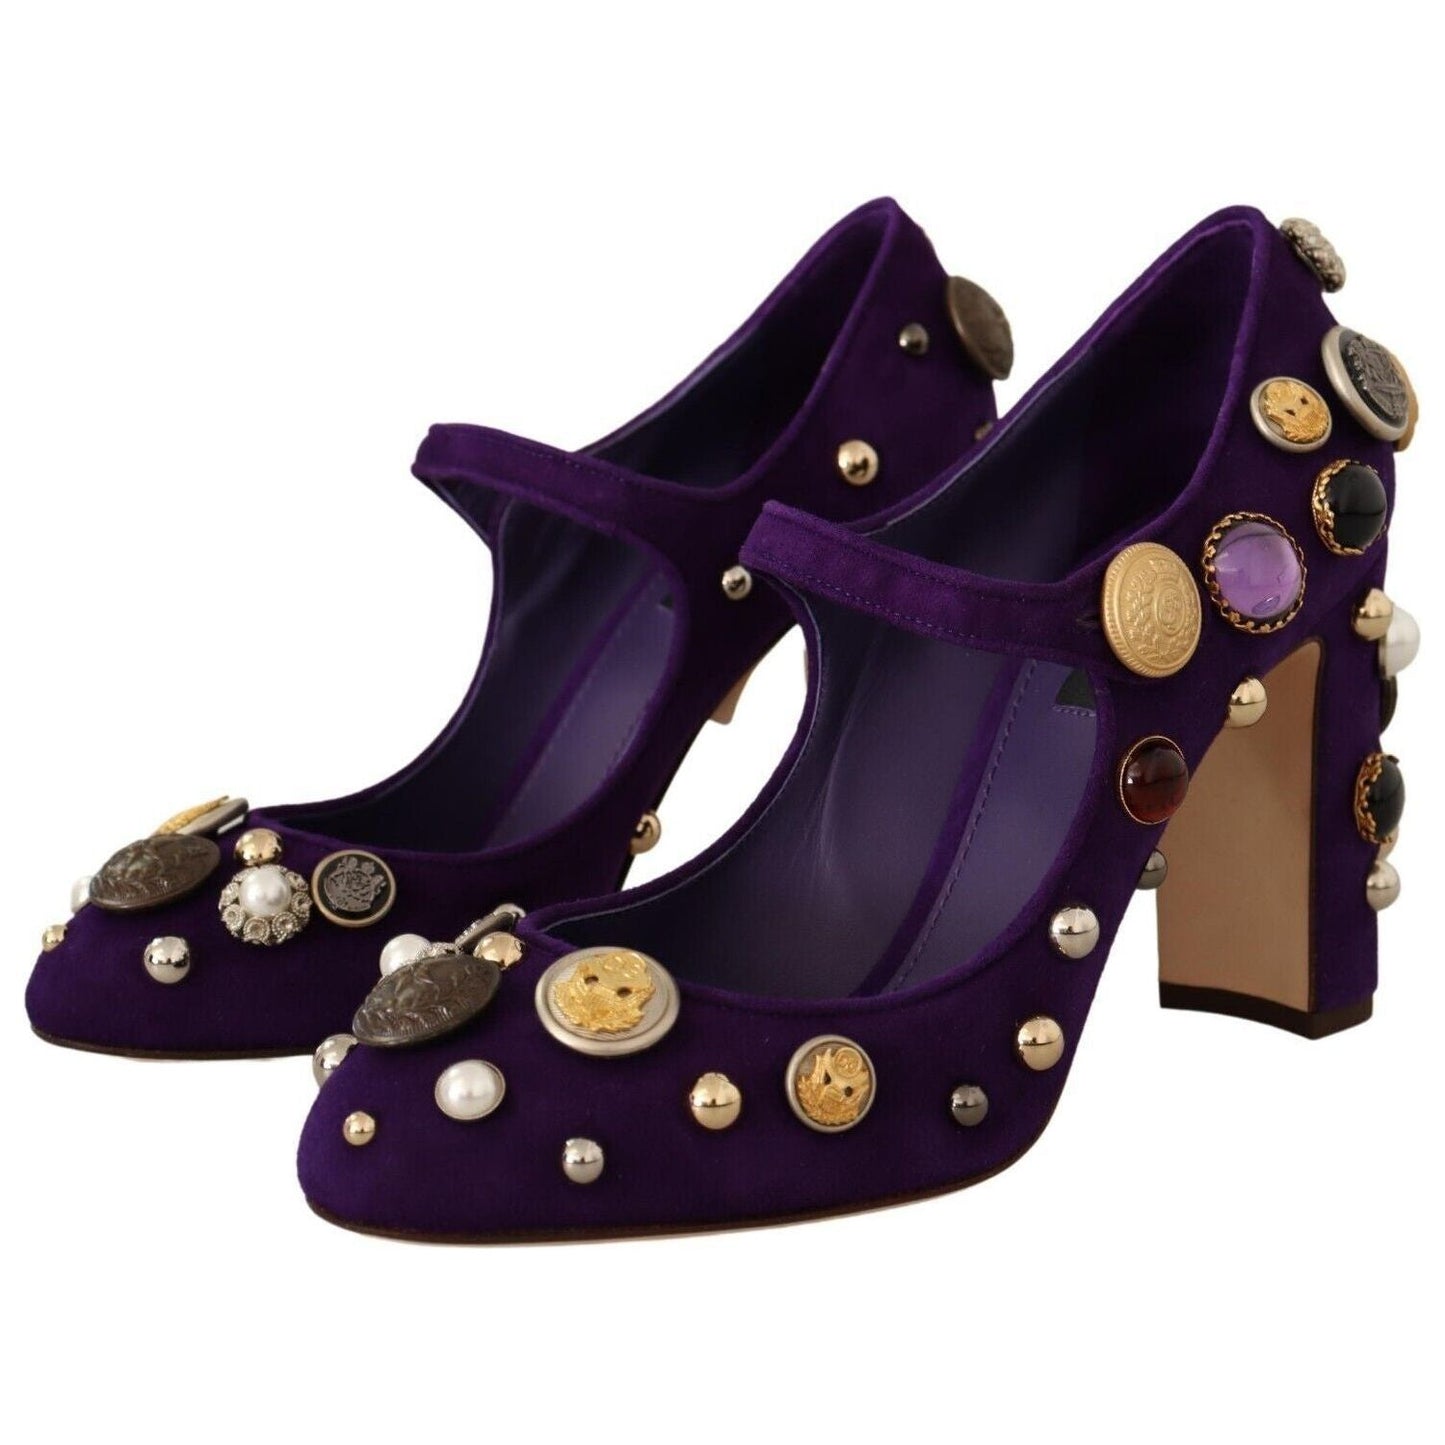 Dolce & Gabbana Elegant Suede Heels with Jewel Buttons Pumps purple-suede-embellished-pump-mary-jane-shoes s-l1600-2022-11-15T160648.140-143739cf-dd2.jpg